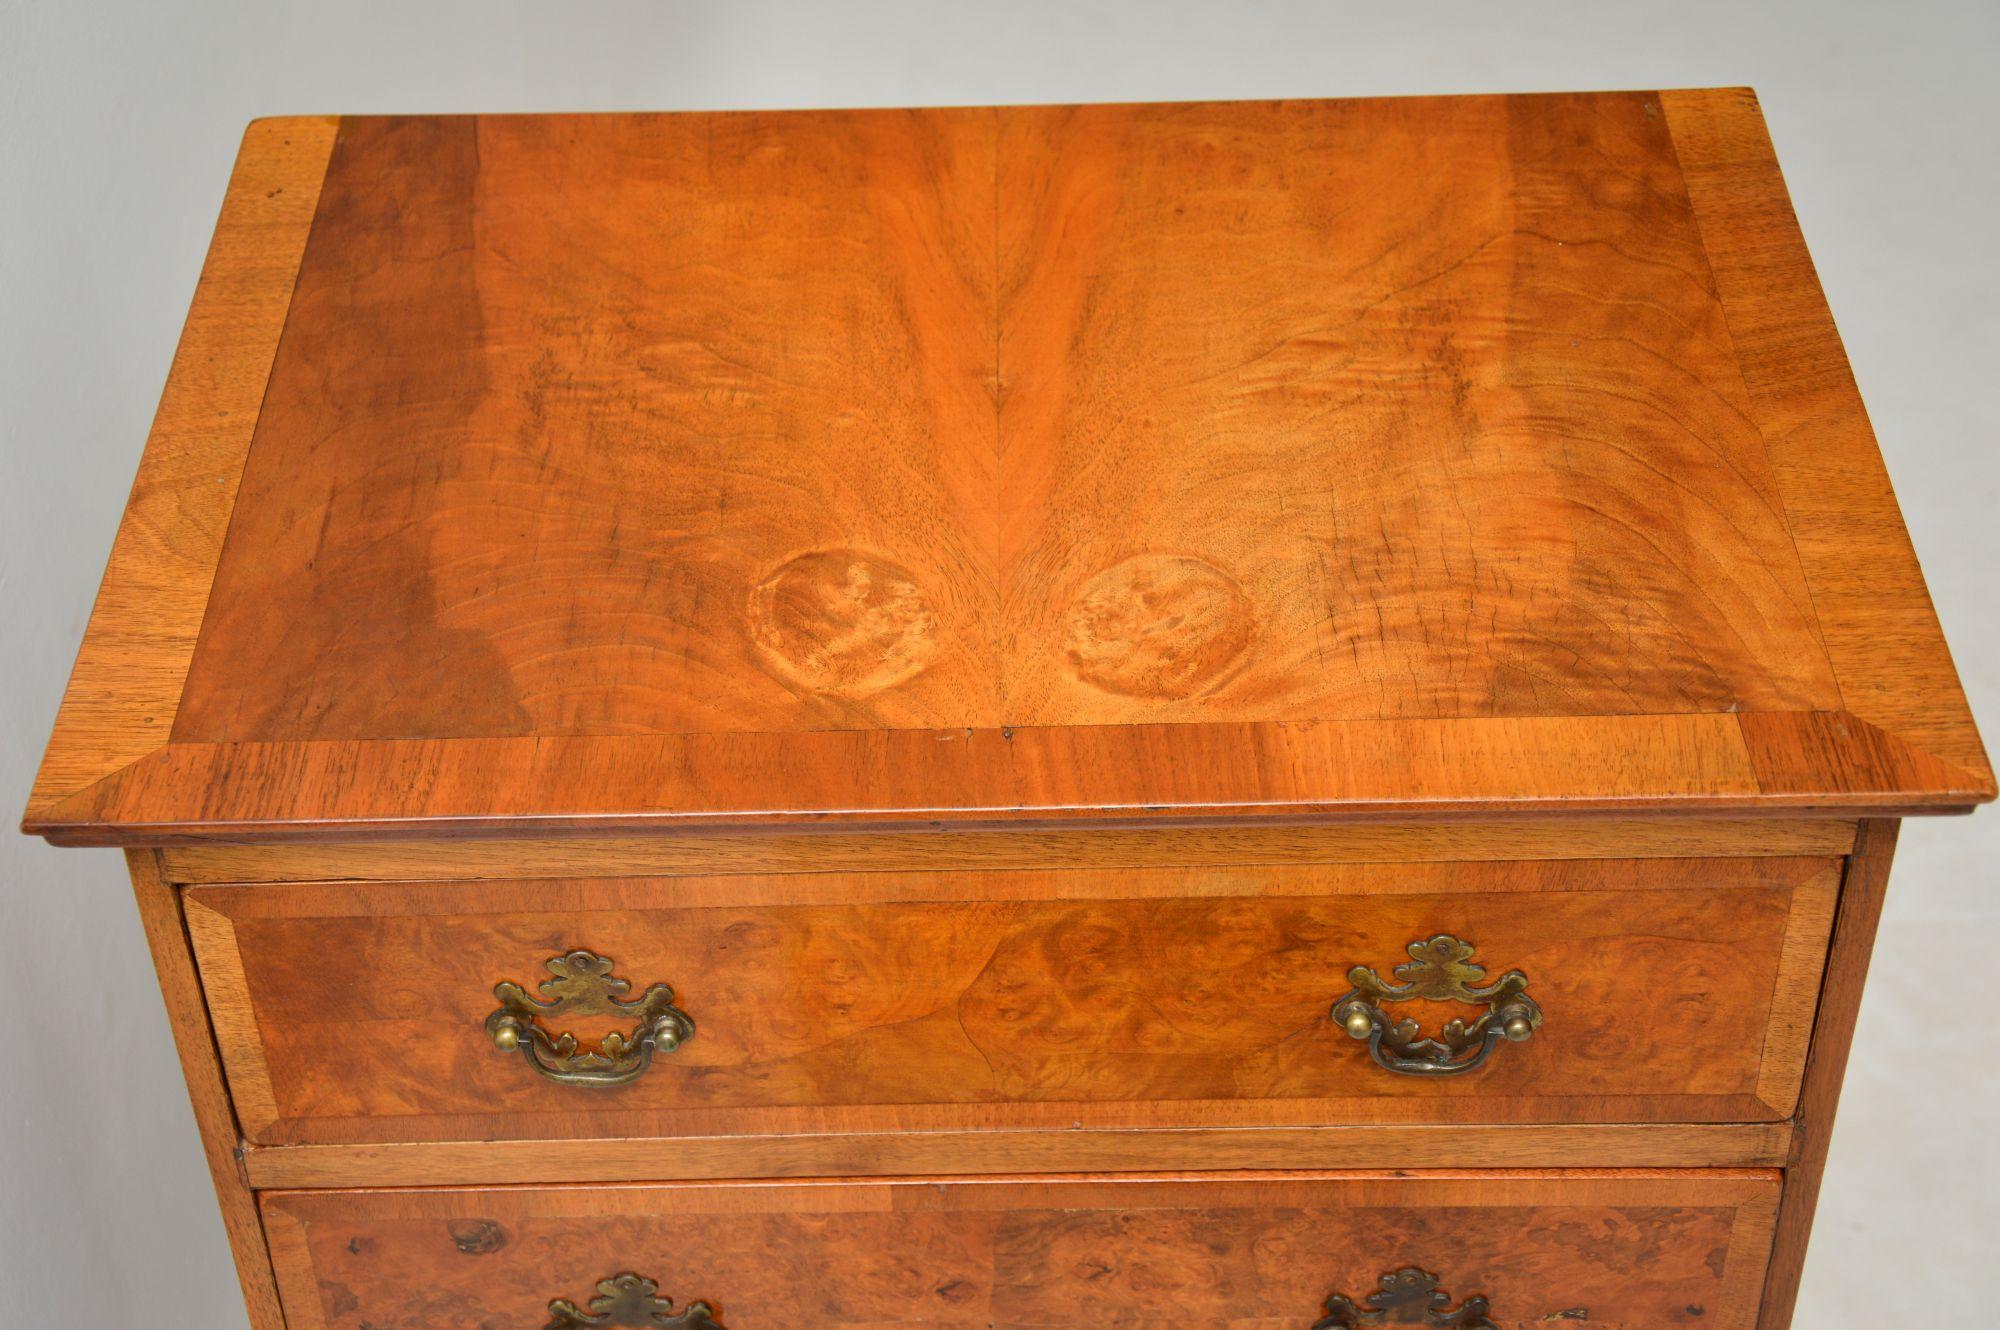 Early 20th Century Antique Burr Walnut Chest of Drawers